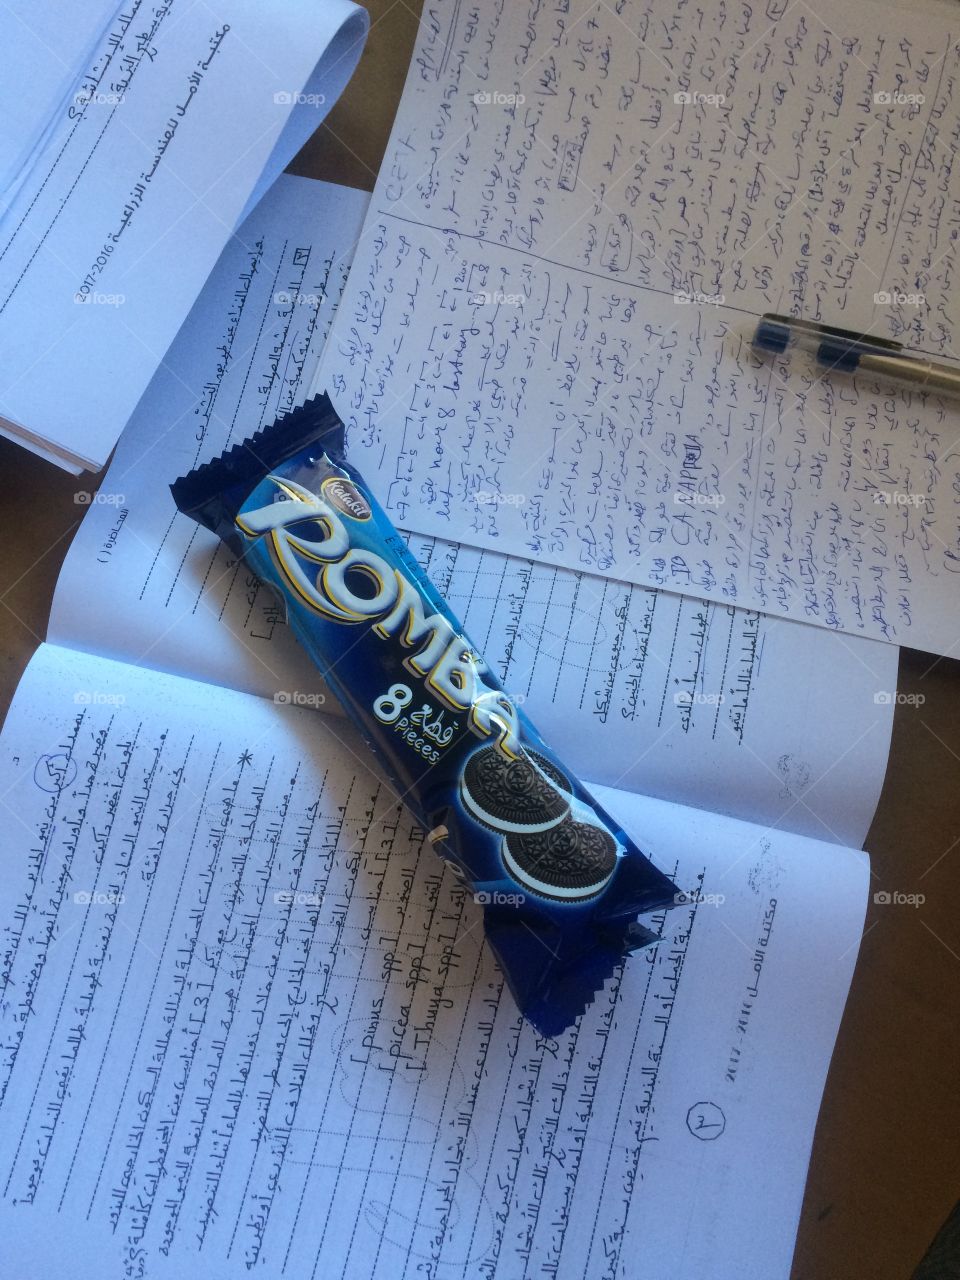 Study time with a quick snack